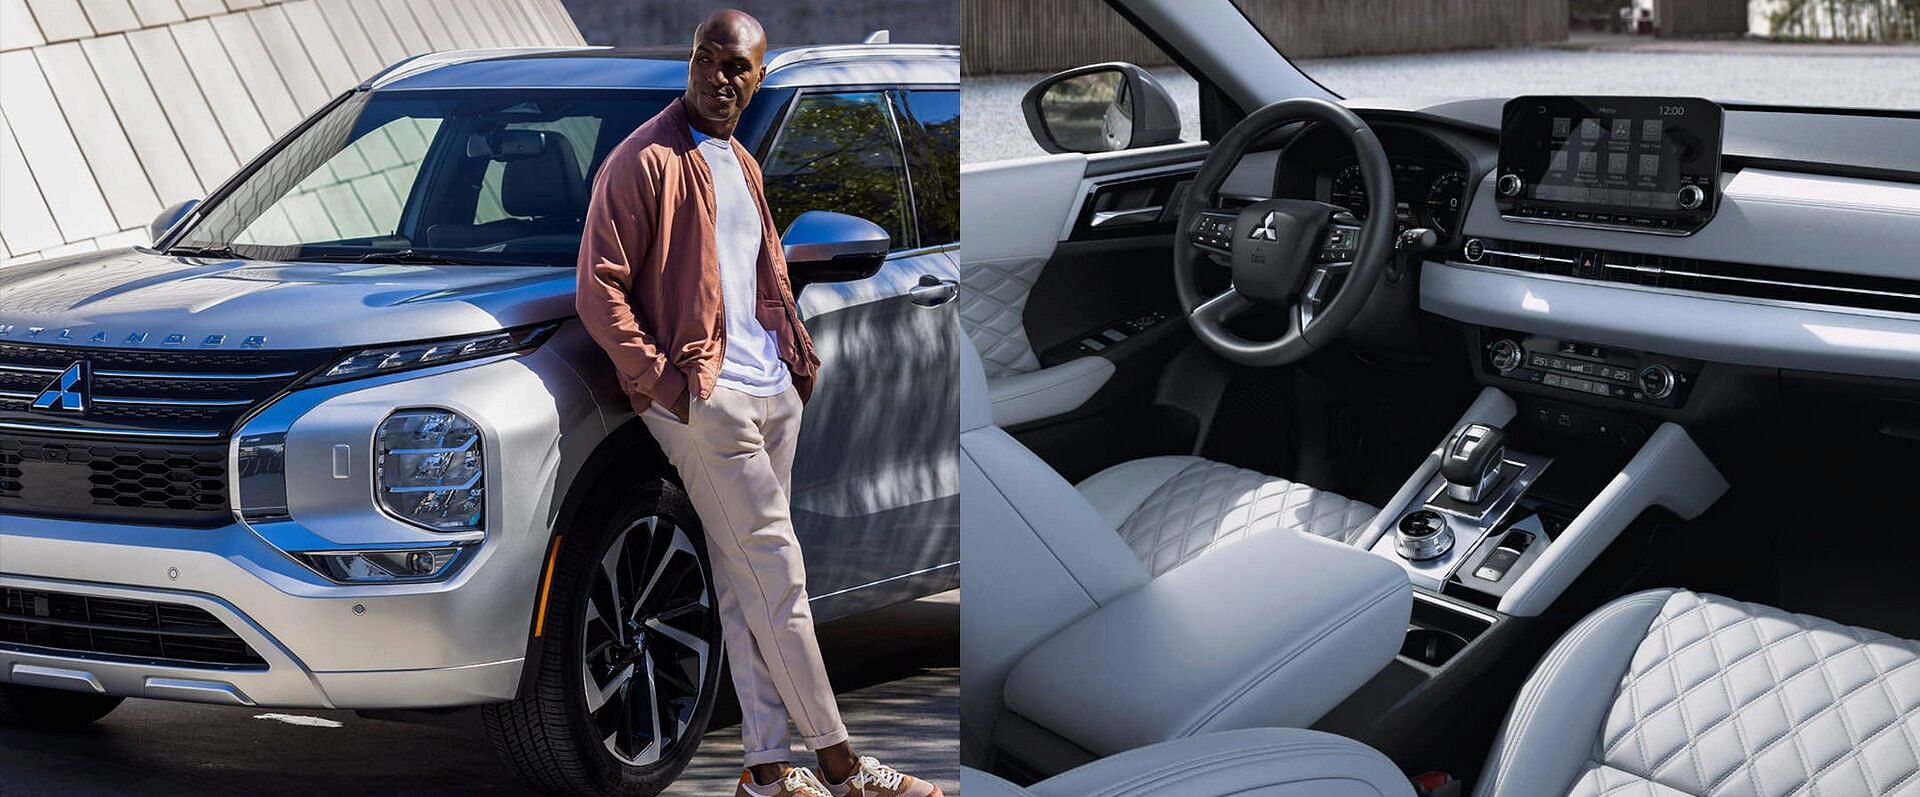 On the left, a man leaning against a silver 2023 mitsubishi outlander. On the right, the white and black interior of a 2023 mitsubishi outlander